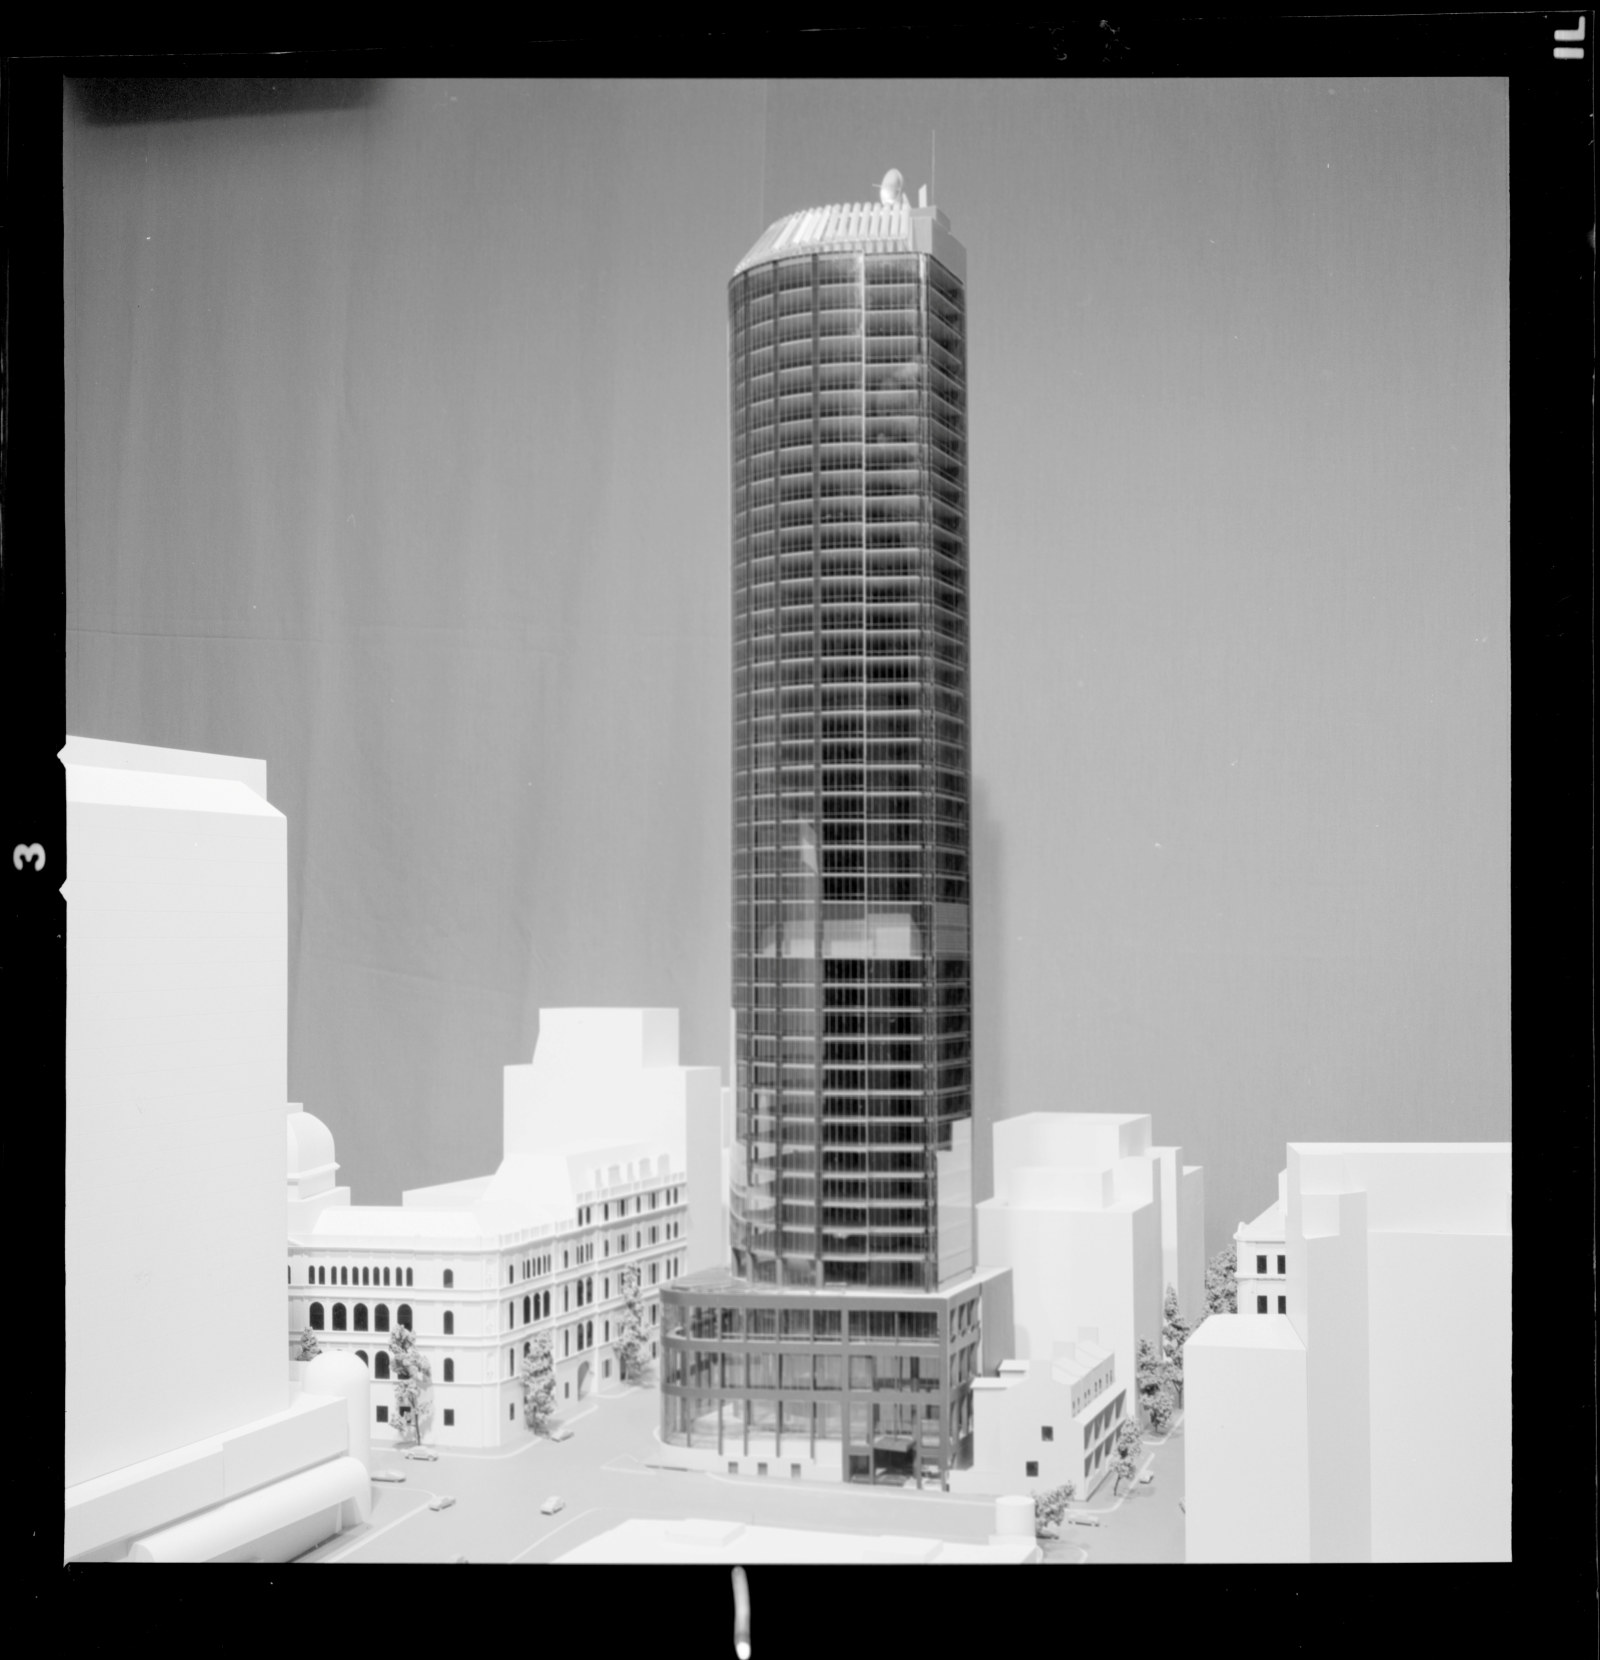 The selected proposal, a 38-storey office tower 1982-1983. Architect: Jackson Teece Chesterman and Willis for Northpoint Holdings Ltd and the State Superannuation Board. NSW STATE ARCHIVES NRS21504 [HI/S127]